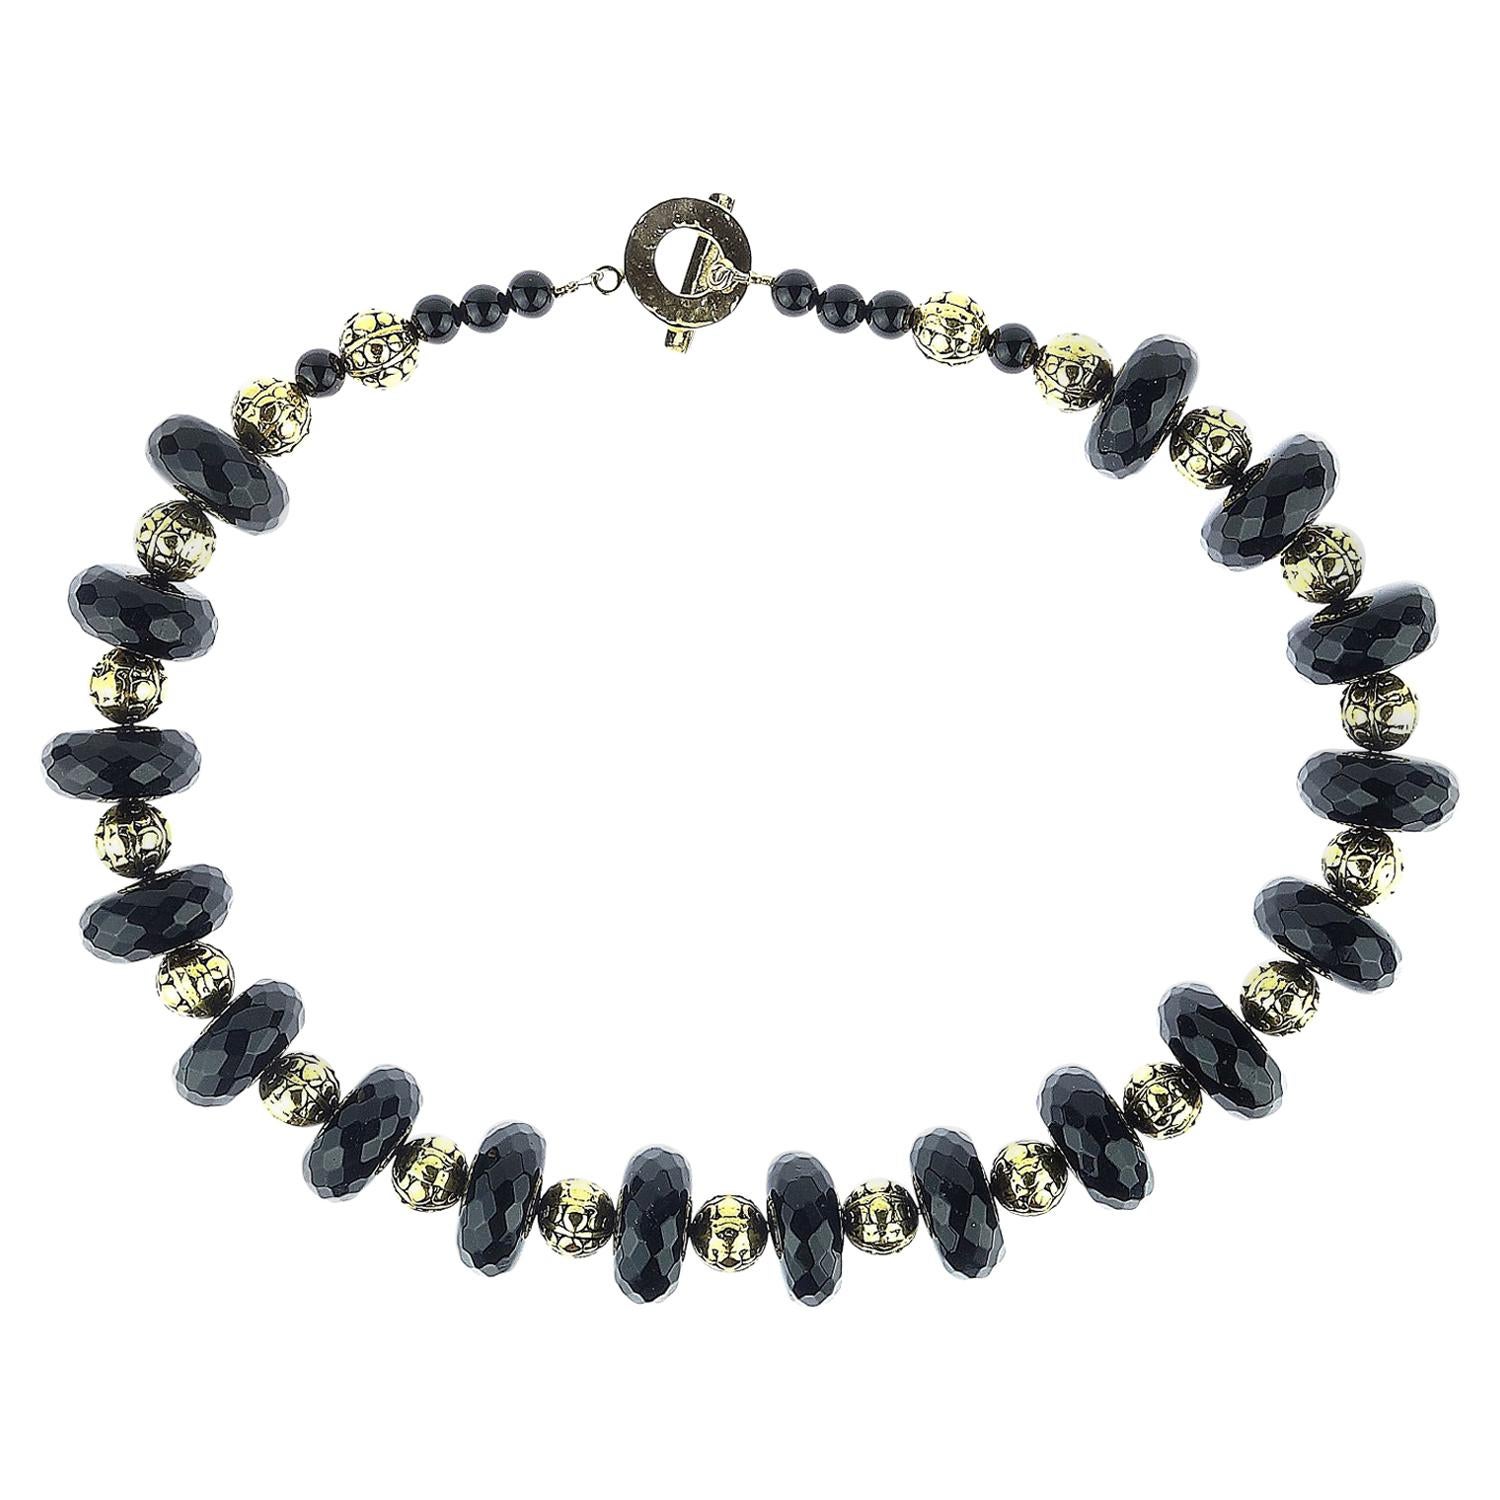 Wear this great necklace when you want to be noticed! This standout necklace in Black Onyx and detailed shiny Brass beads sits easily around your neck. The large highly polished and faceted Black Onyx rondels are 19mm and the Brass beads are 10mm.